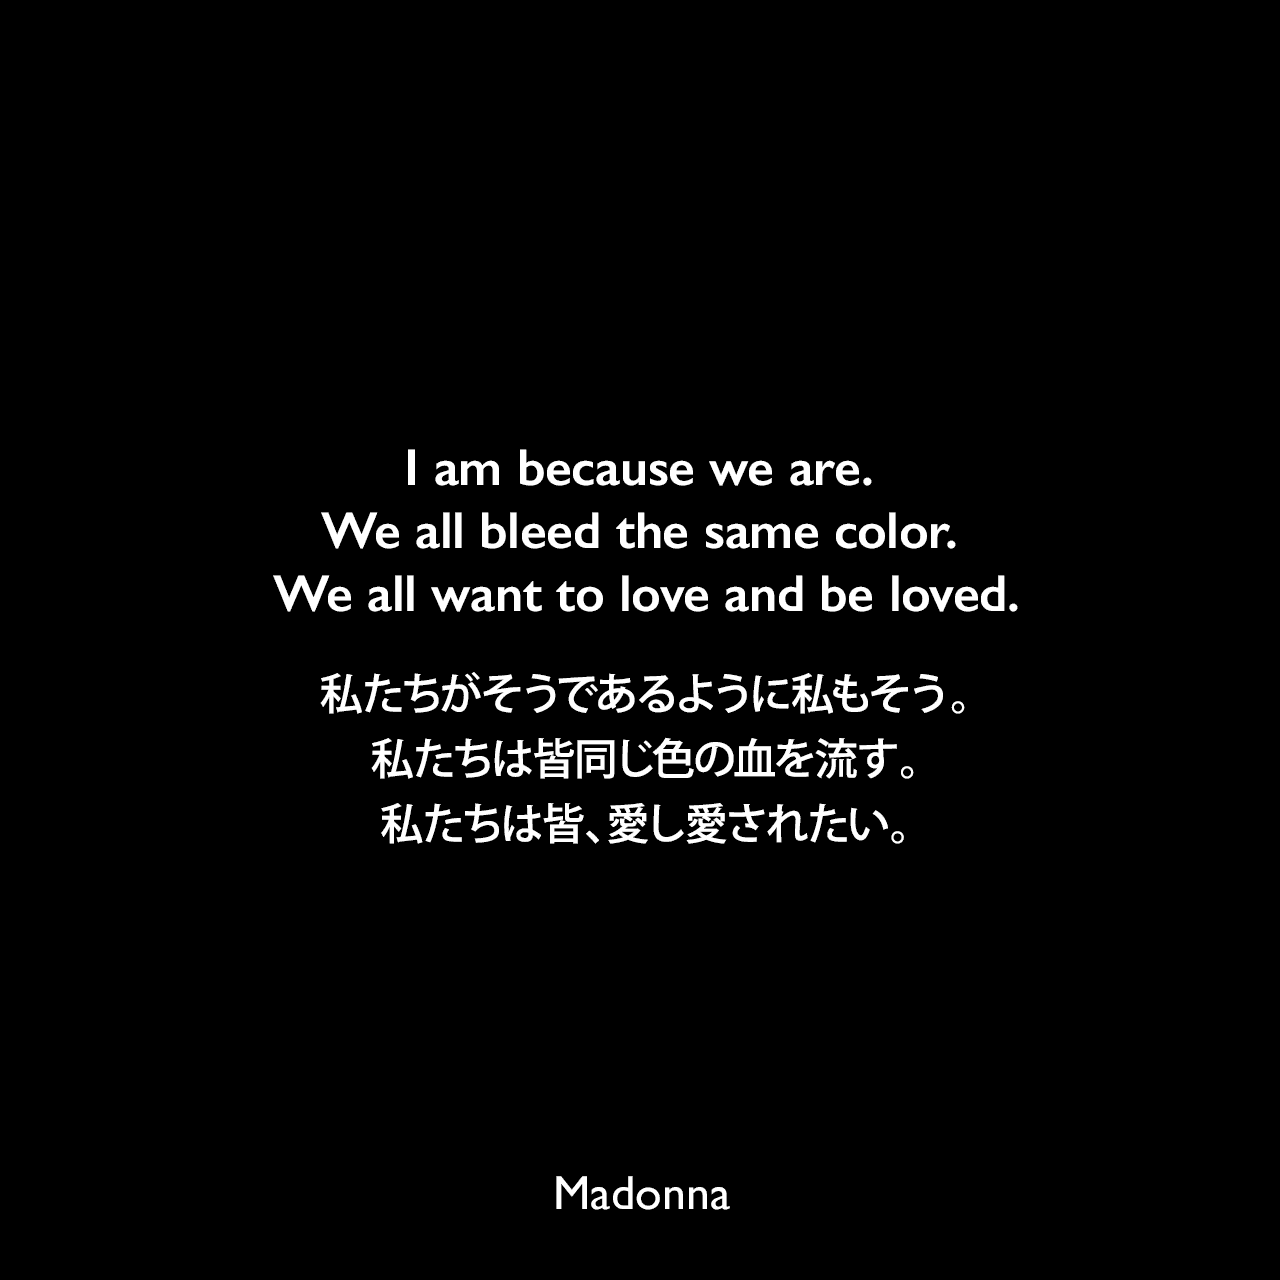 I am because we are. We all bleed the same color. We all want to love and be loved.私たちがそうであるように私もそう。私たちは皆同じ色の血を流す。私たちは皆、愛し愛されたい。- マドンナがプロデュース、脚本執筆をしたドキュメンタリー映画「I Am Because We Are」についてMadonna